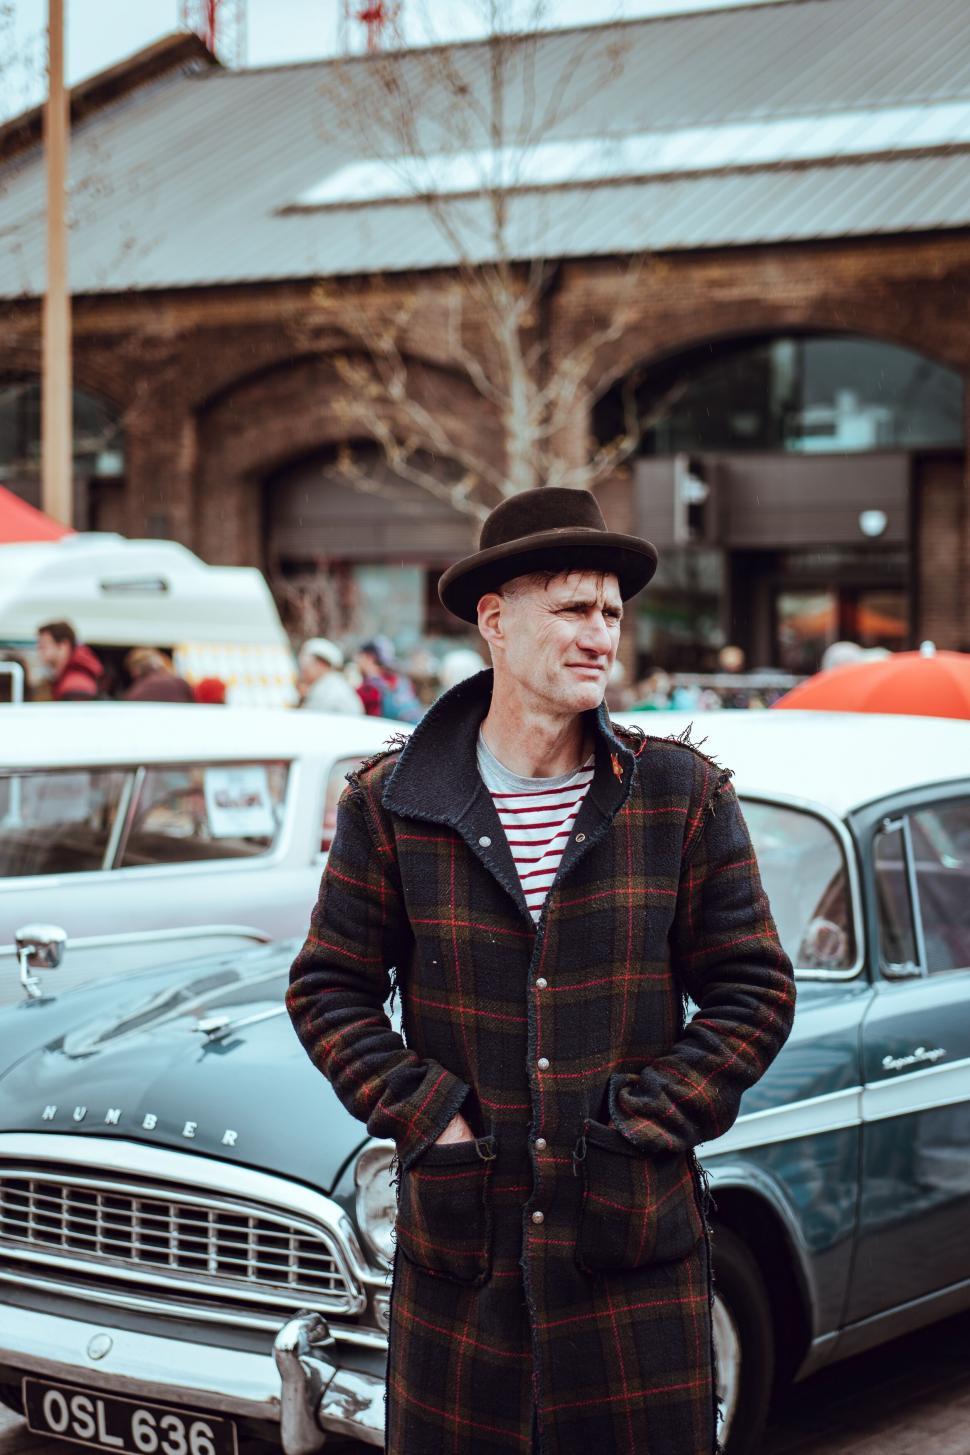 Free Image of Stylish man by vintage car and market 